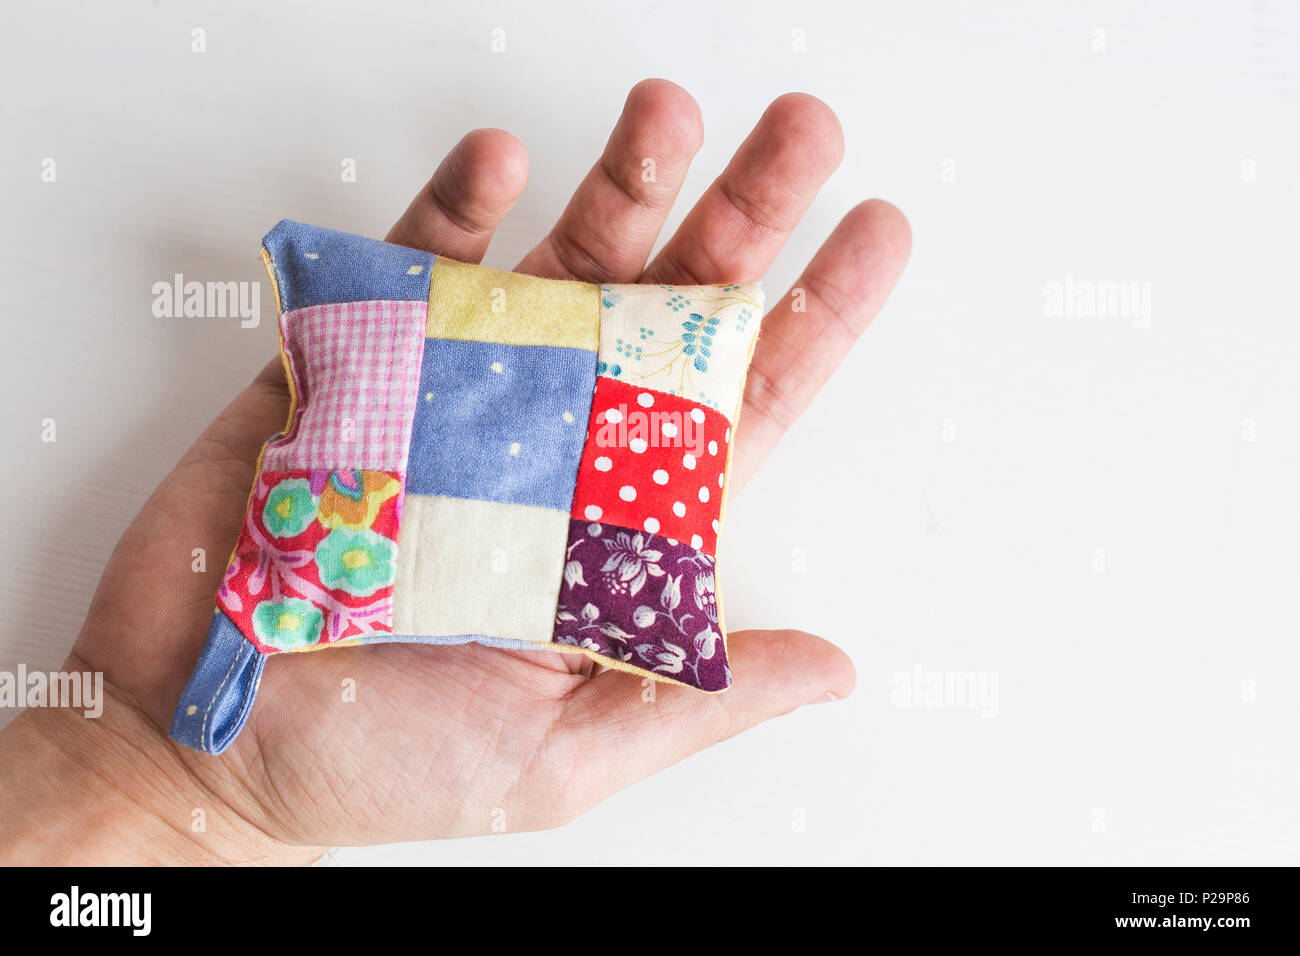 patchwork, quilting, sewing, tailoring and fashion concept - close-up on beautiful colorful stitched pincushion in human hand, macro on pillow with wh Stock Photo